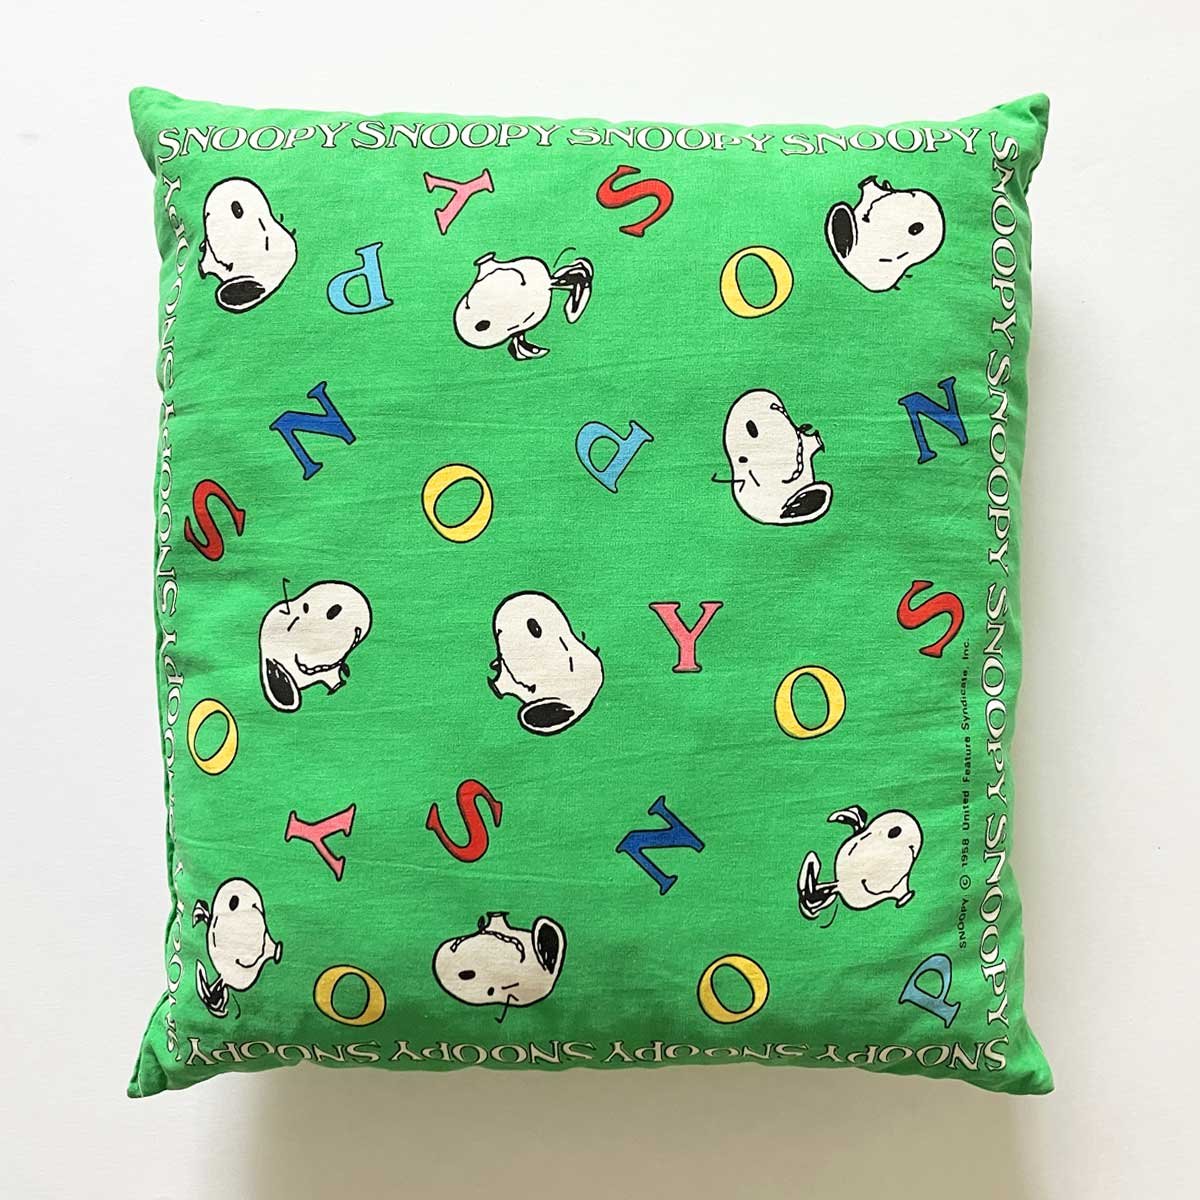 Image of Coussin Snoopy vert années 80